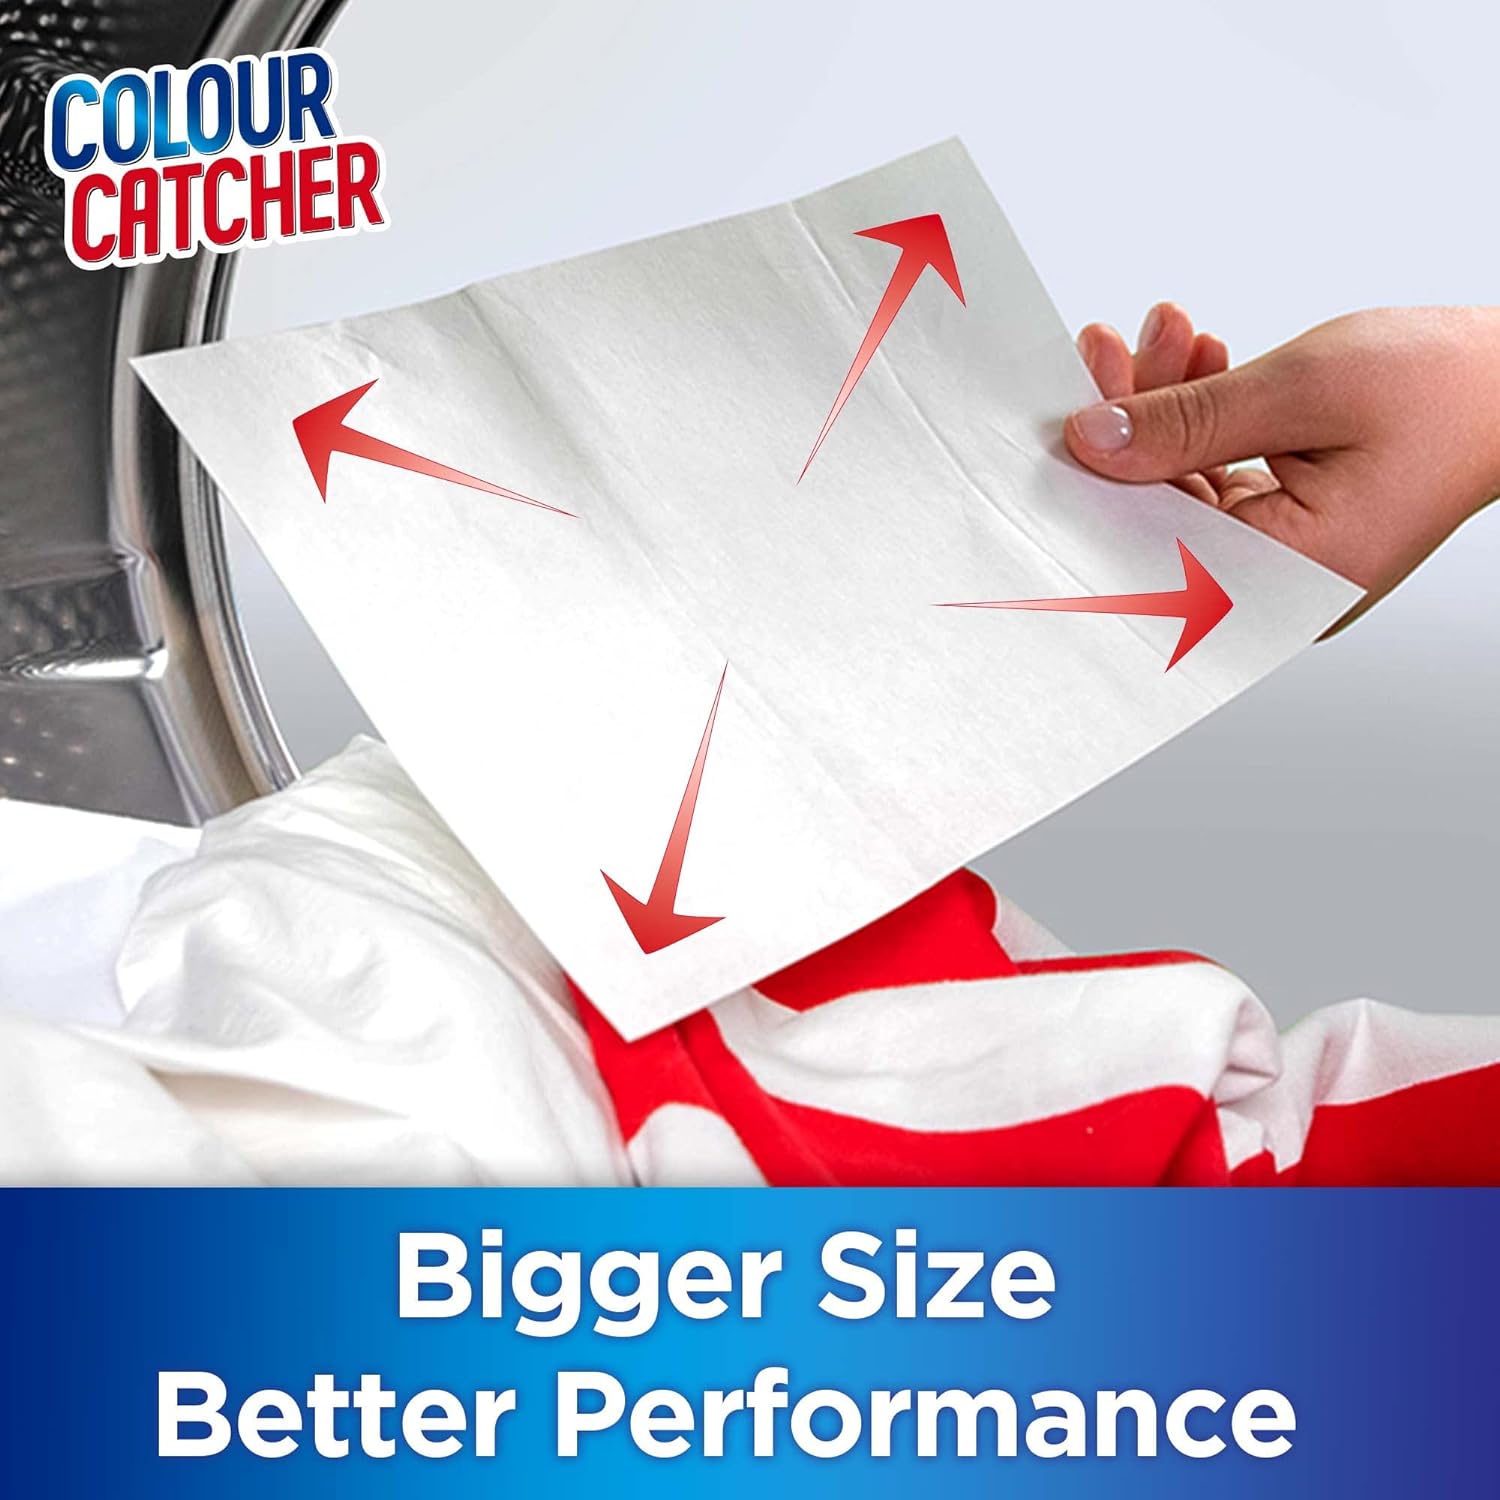 Colour Catcher Laundry Sheets, 2in1 - 50 Sheets 2840